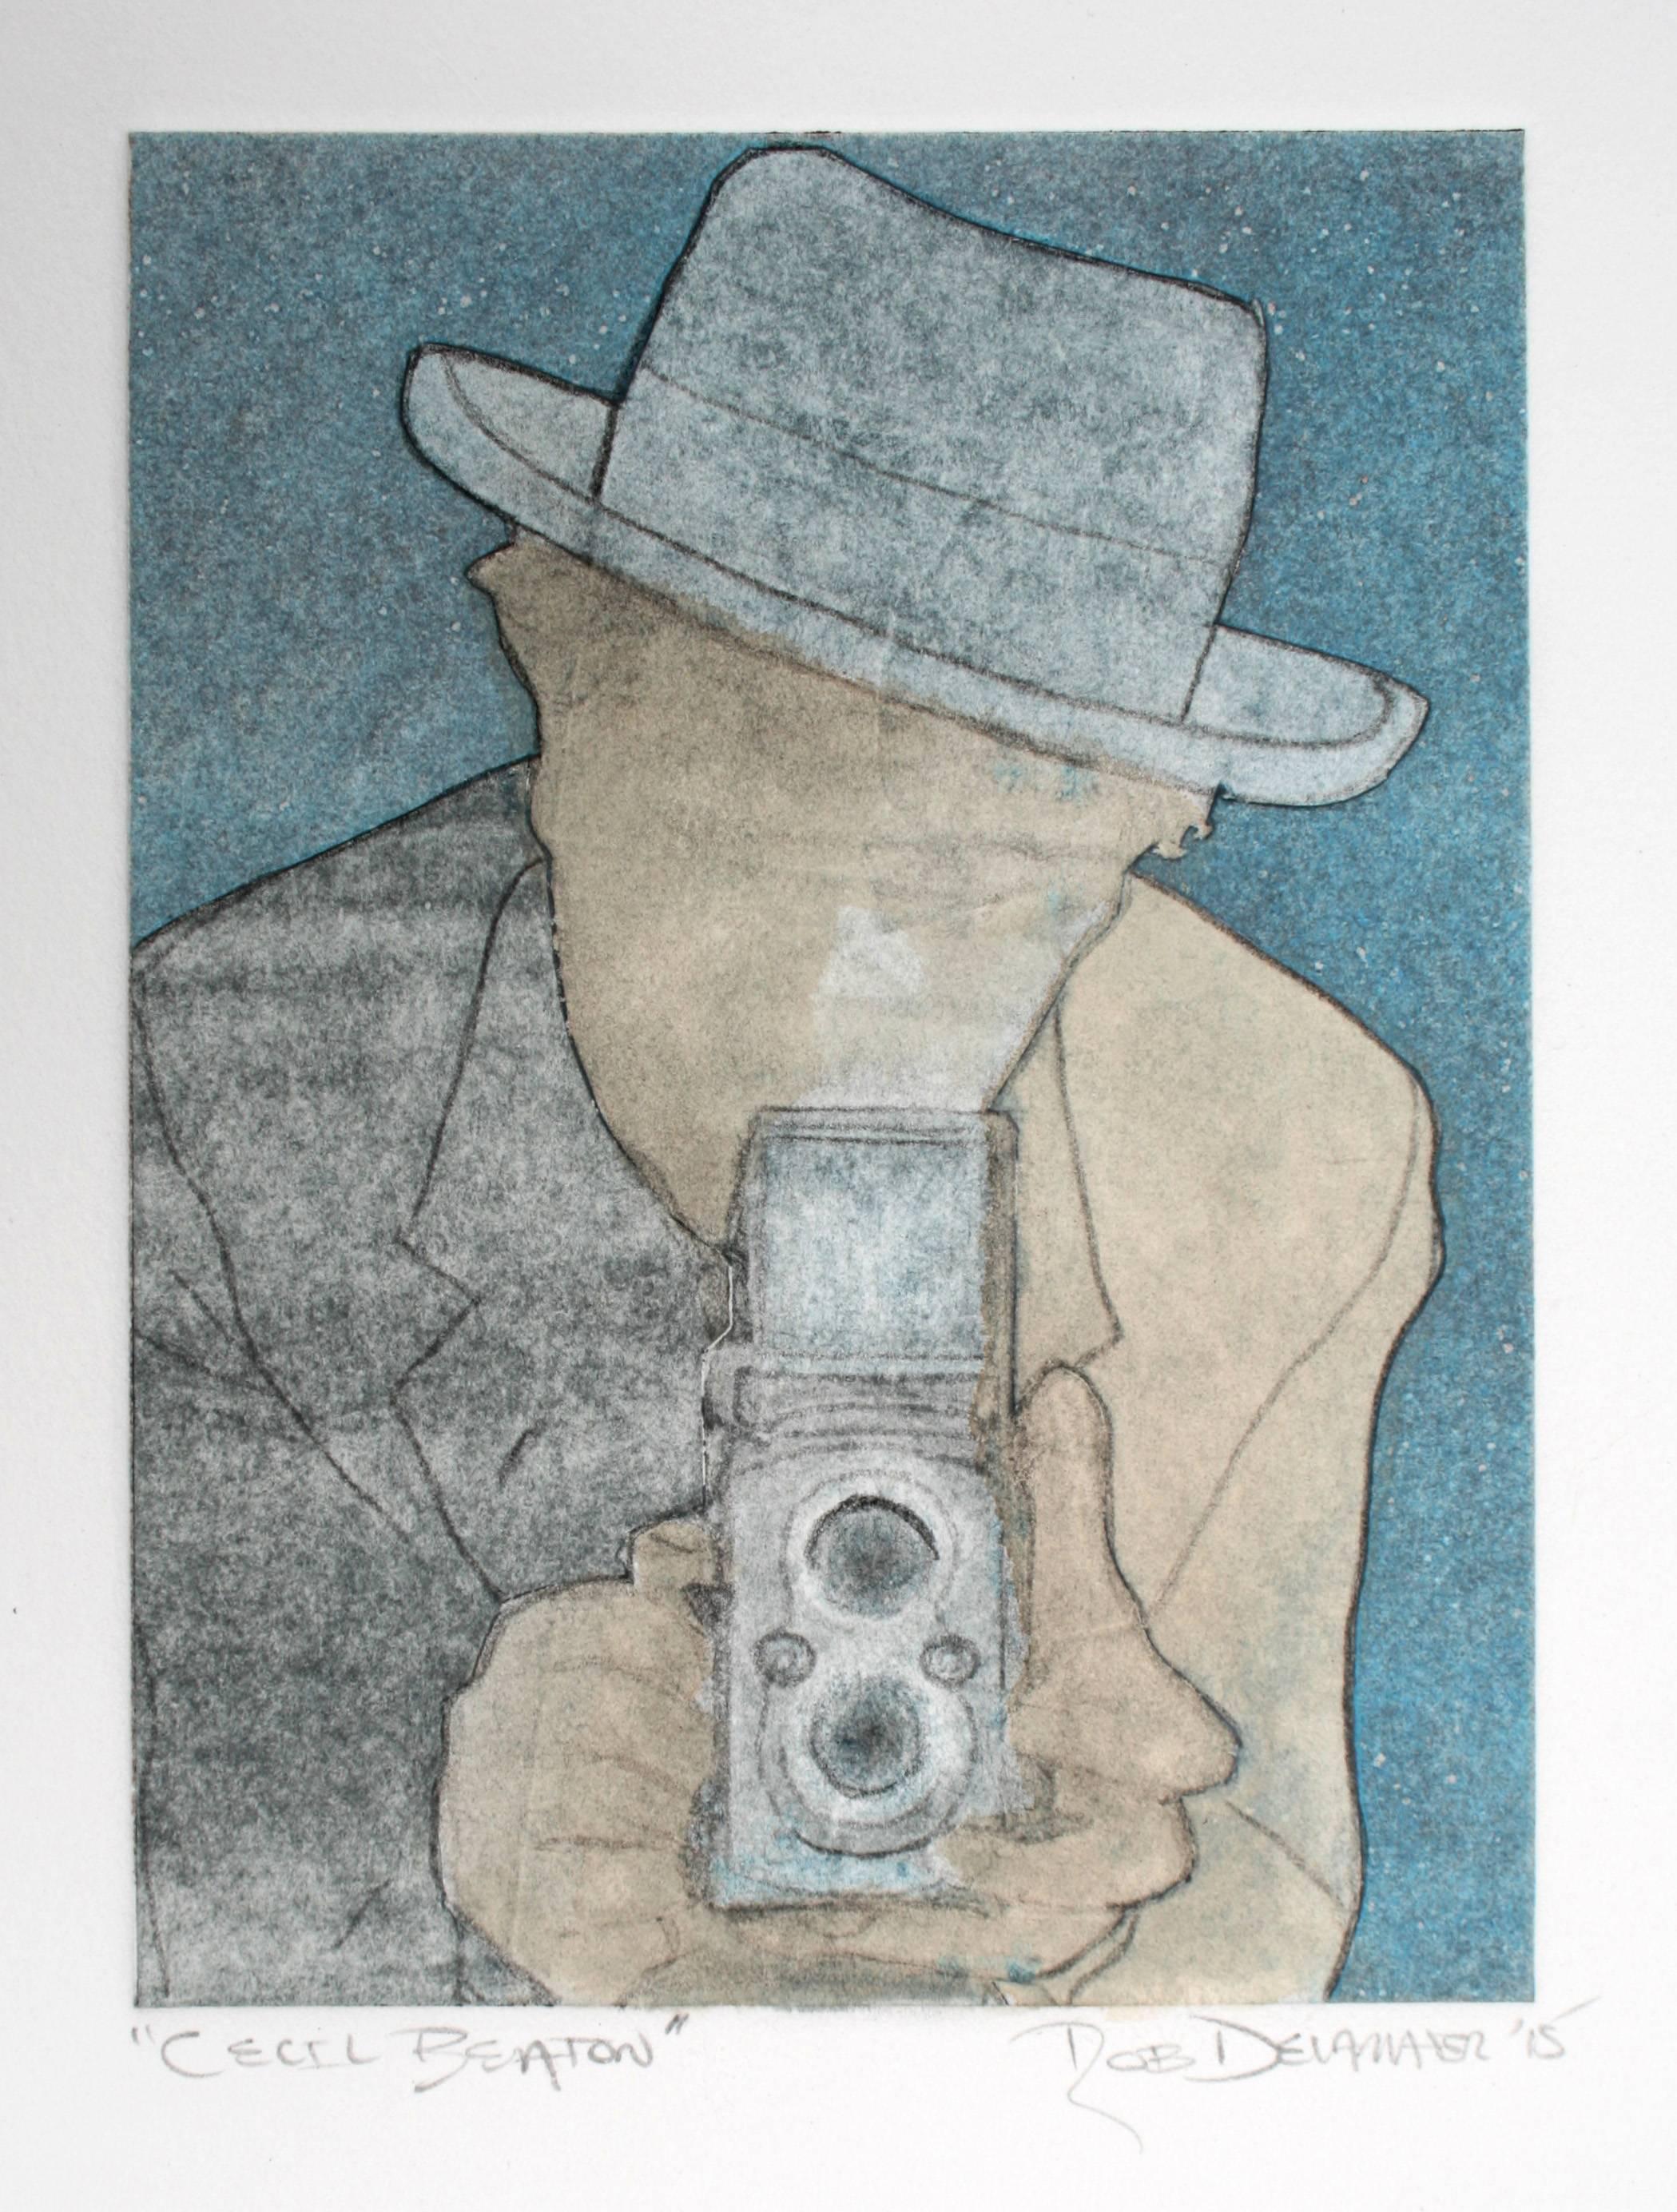 Entitled "Cecil Beaton" this 2015 mixed media monoprint on heavy archival paper piece is by San Francisco artist and Lost Art Salon co-owner Rob Delamater (b.1966). This piece was created for his Fall, 2015 show, "This is What Artists Look Like".